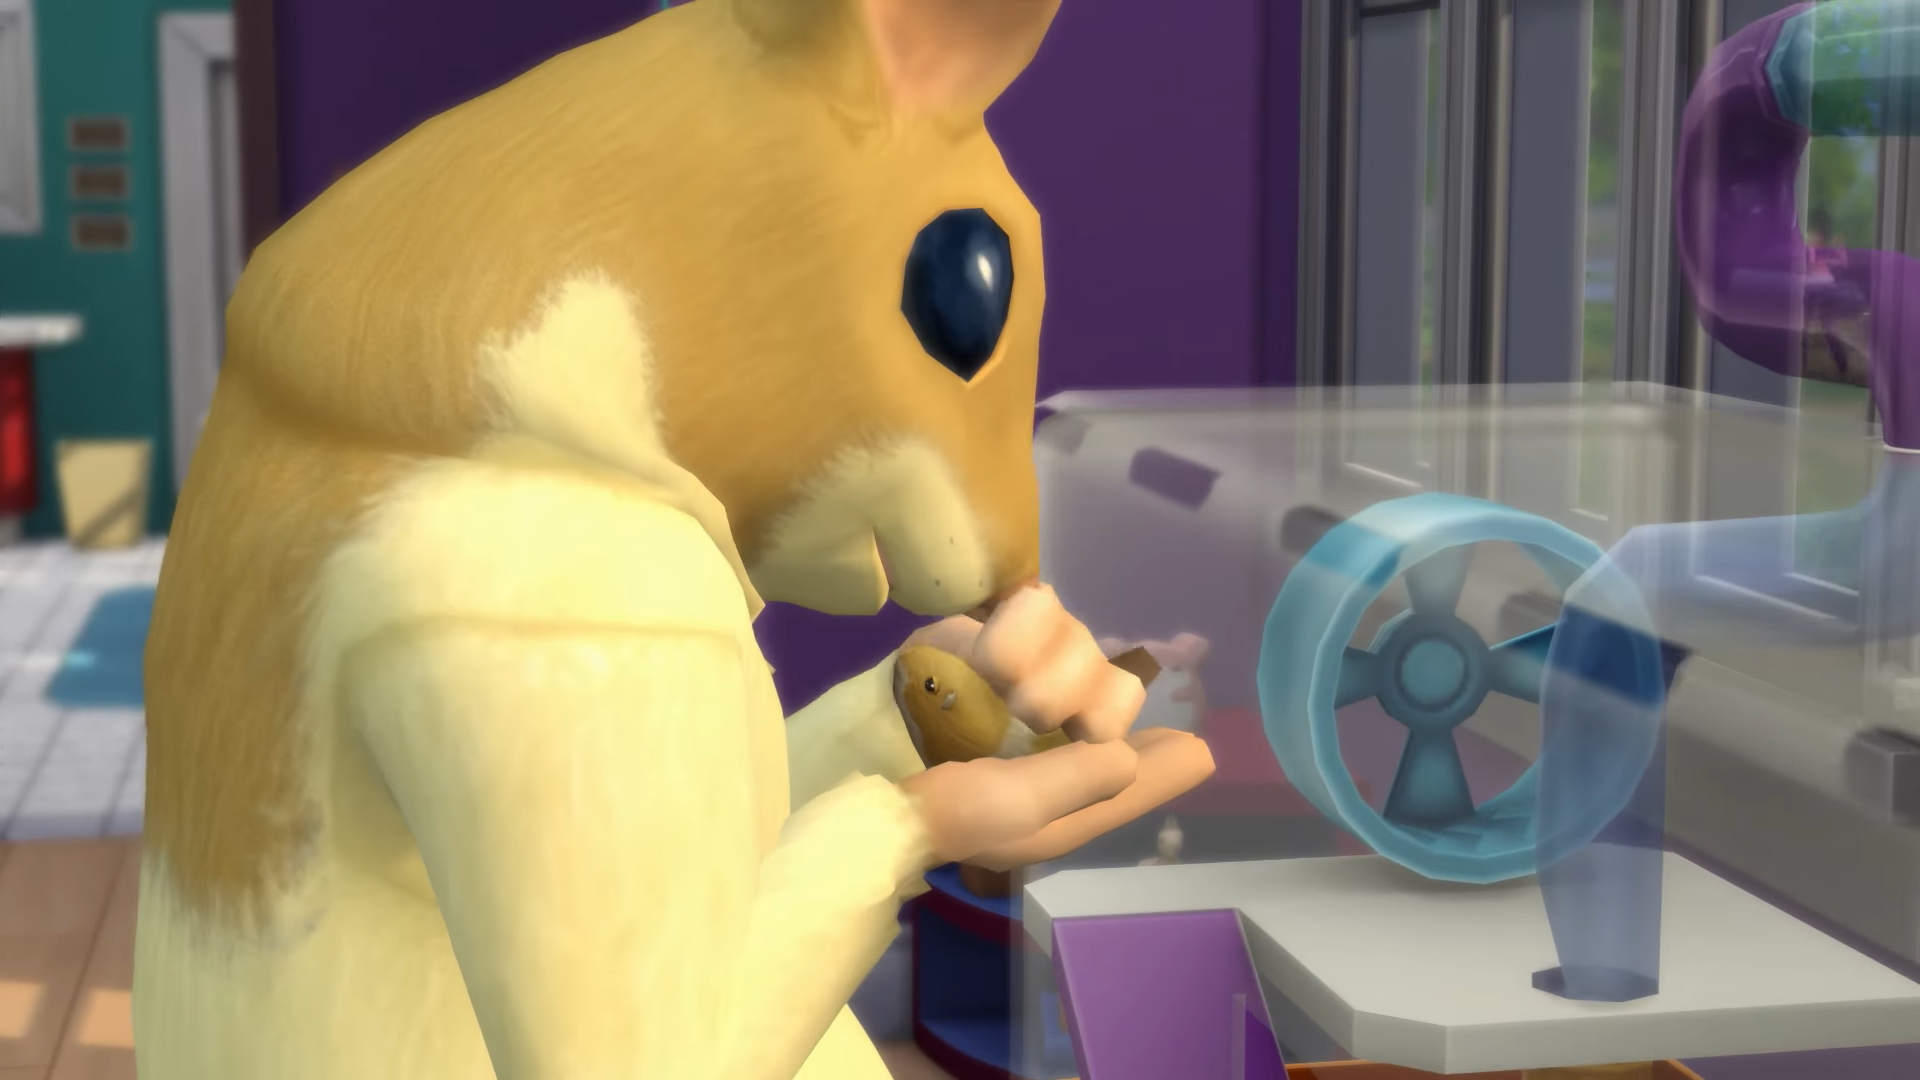 Hamsters Rats And Hedgehogs Are Being Added To The Sims 4 In A New Stuff Pack Dot Esports